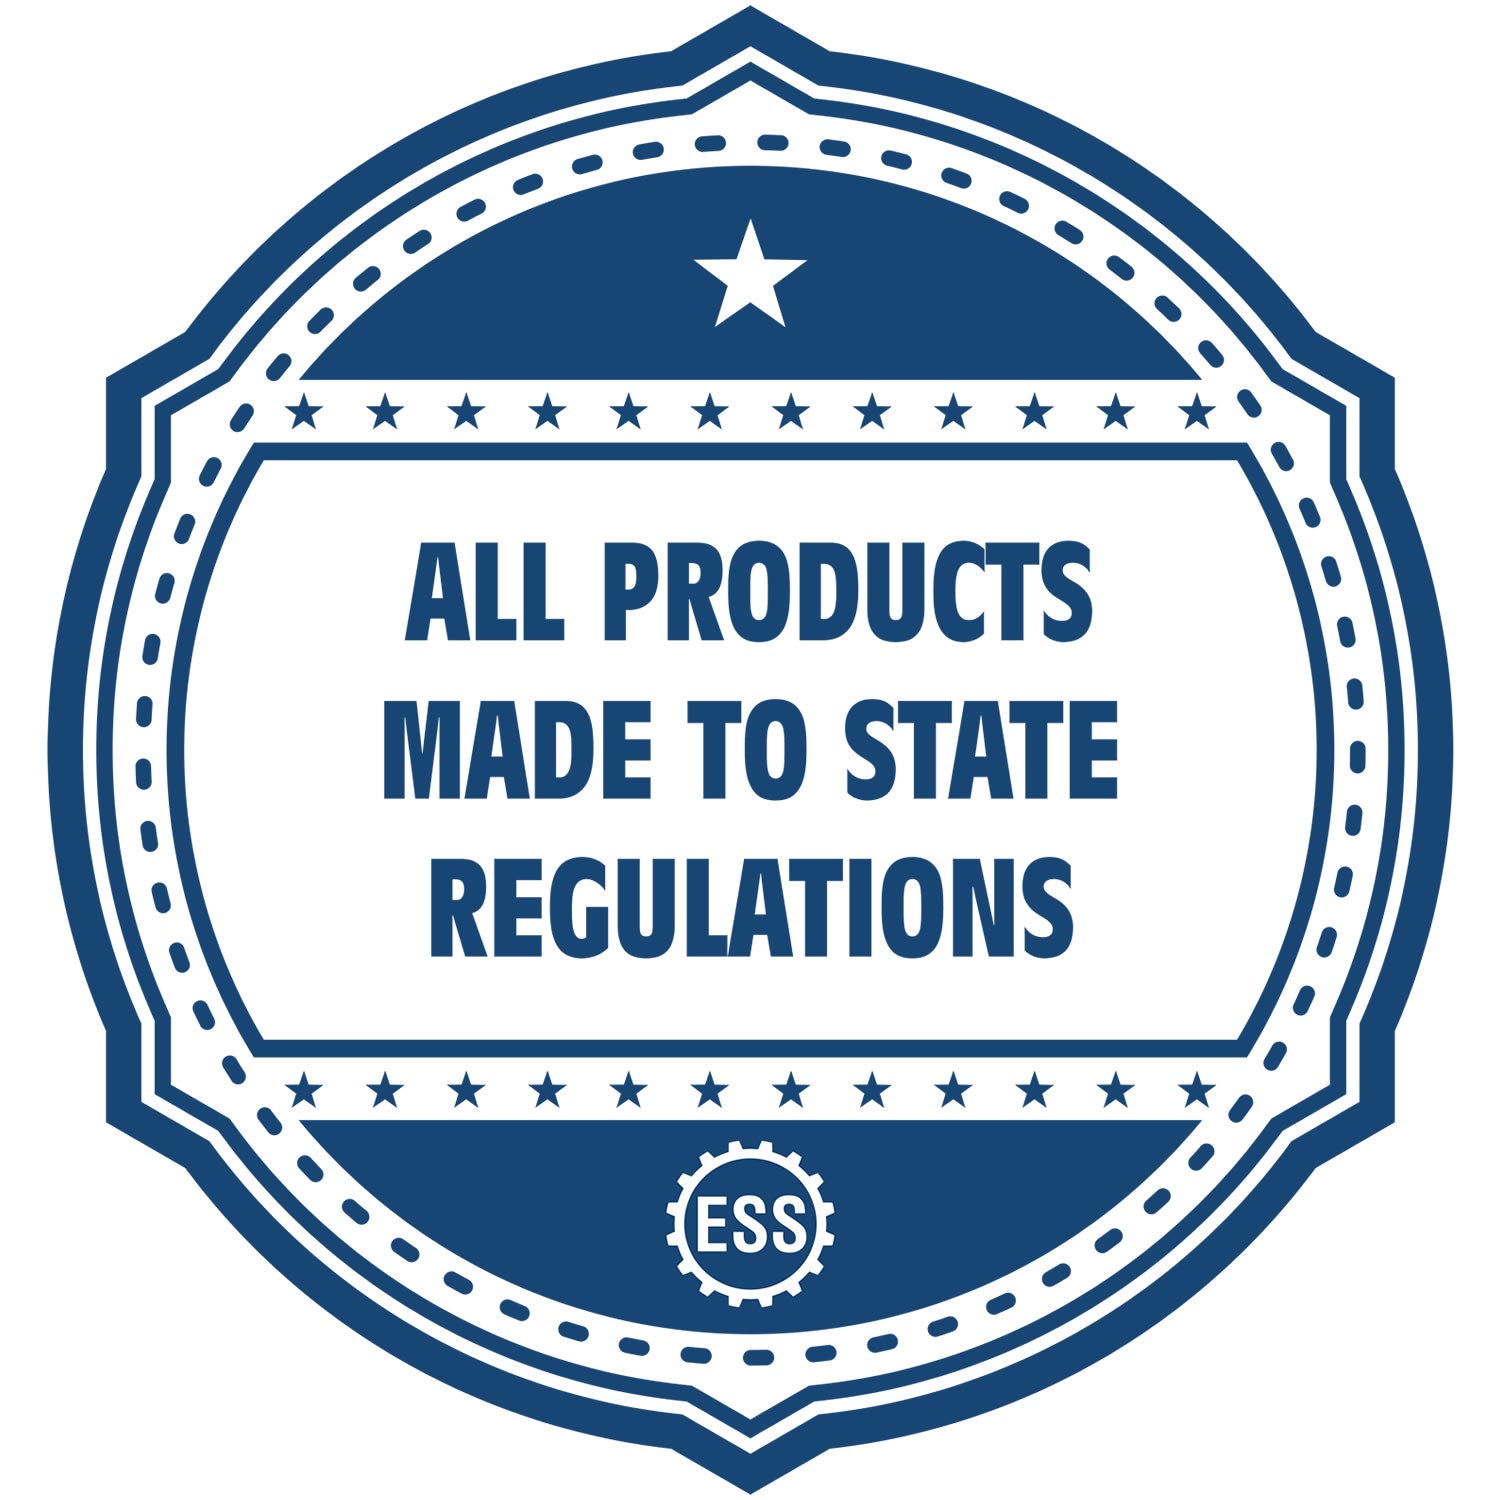 An icon or badge element for the Slim Pre-Inked Arkansas Professional Engineer Seal Stamp showing that this product is made in compliance with state regulations.